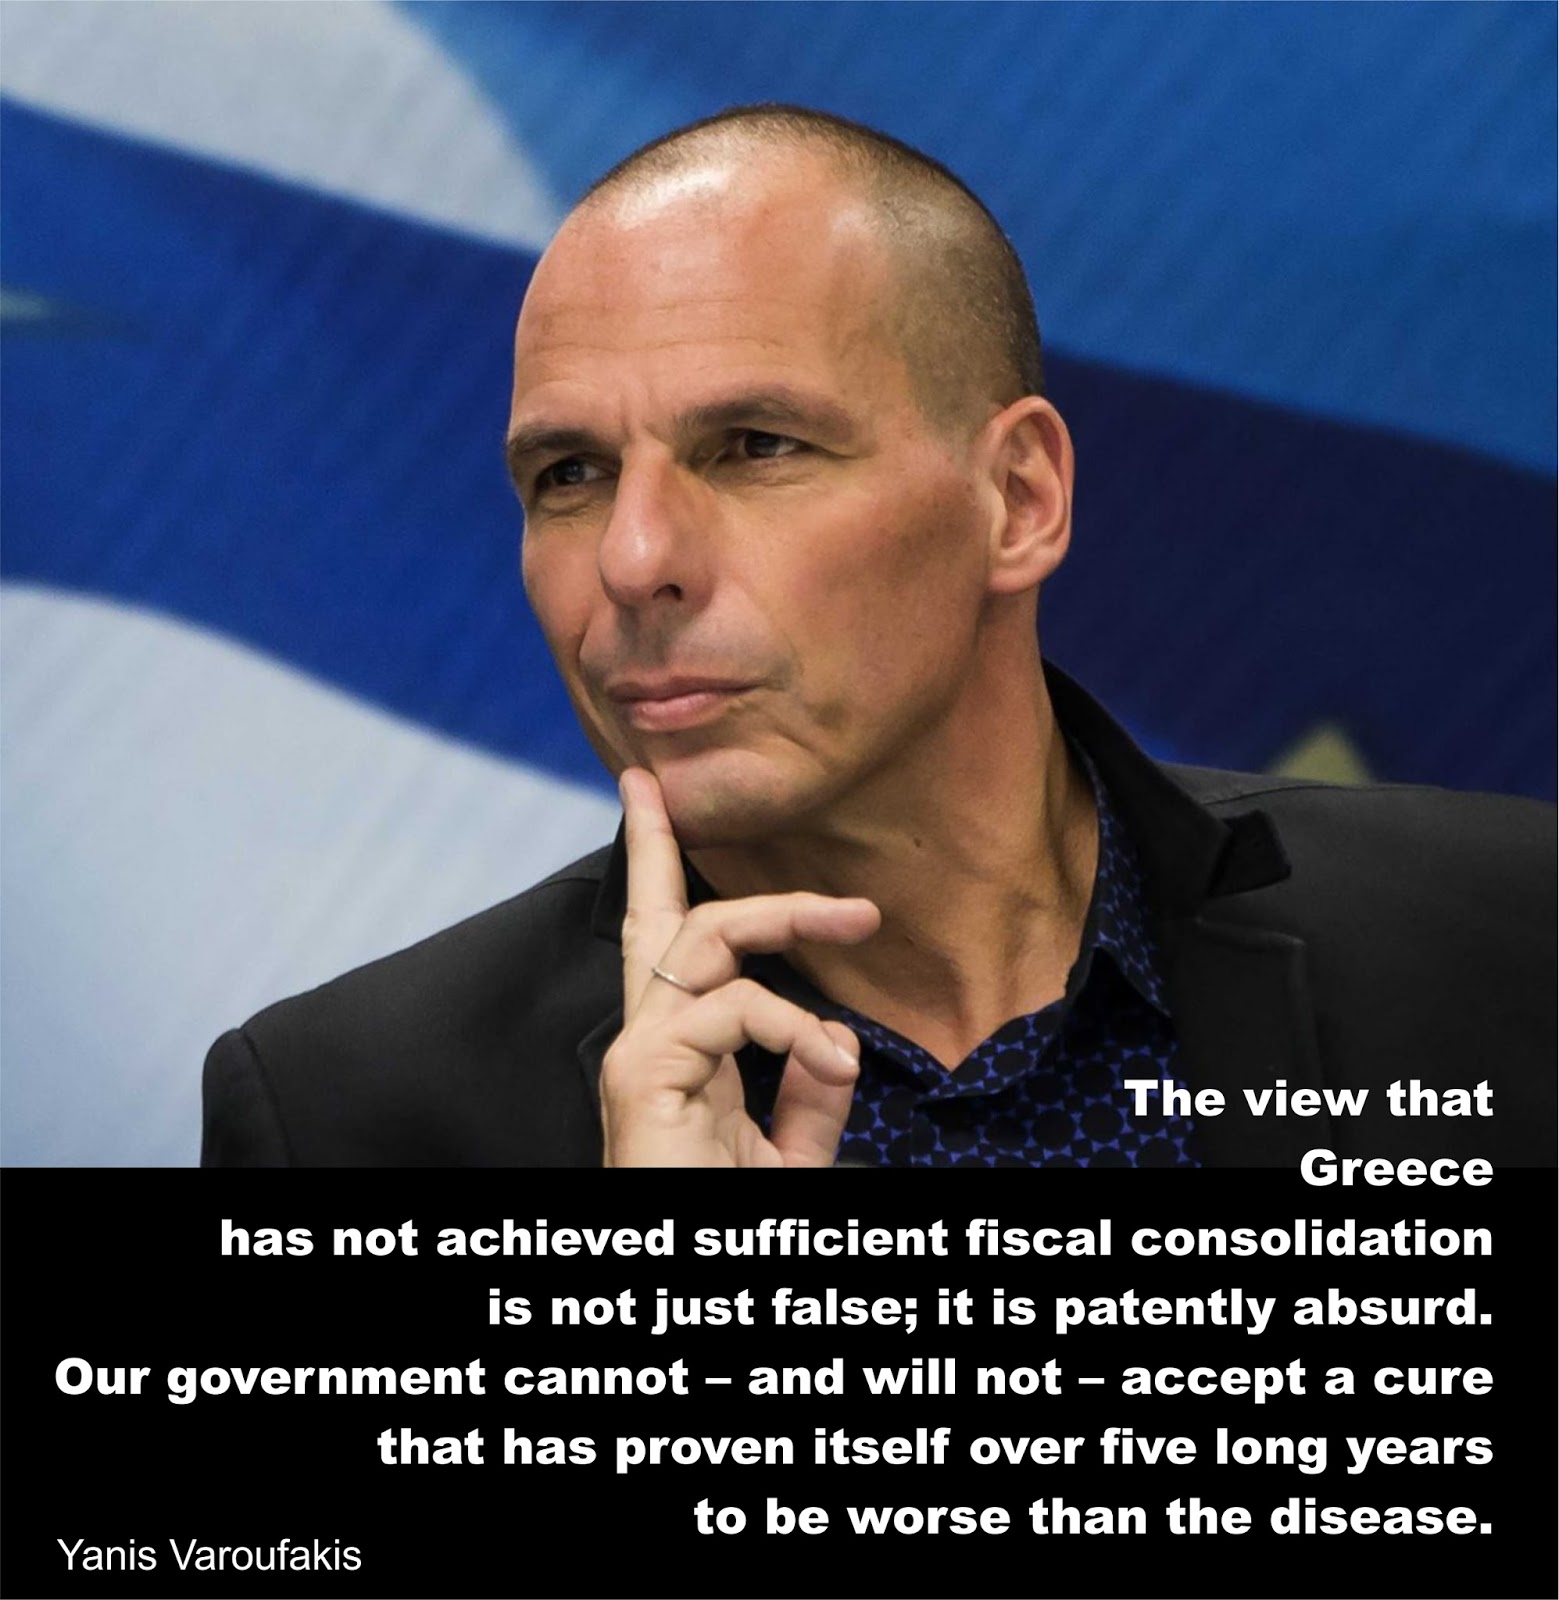 http://www.project-syndicate.org/commentary/greece-government-reforms-by-yanis-varoufakis-2015-05